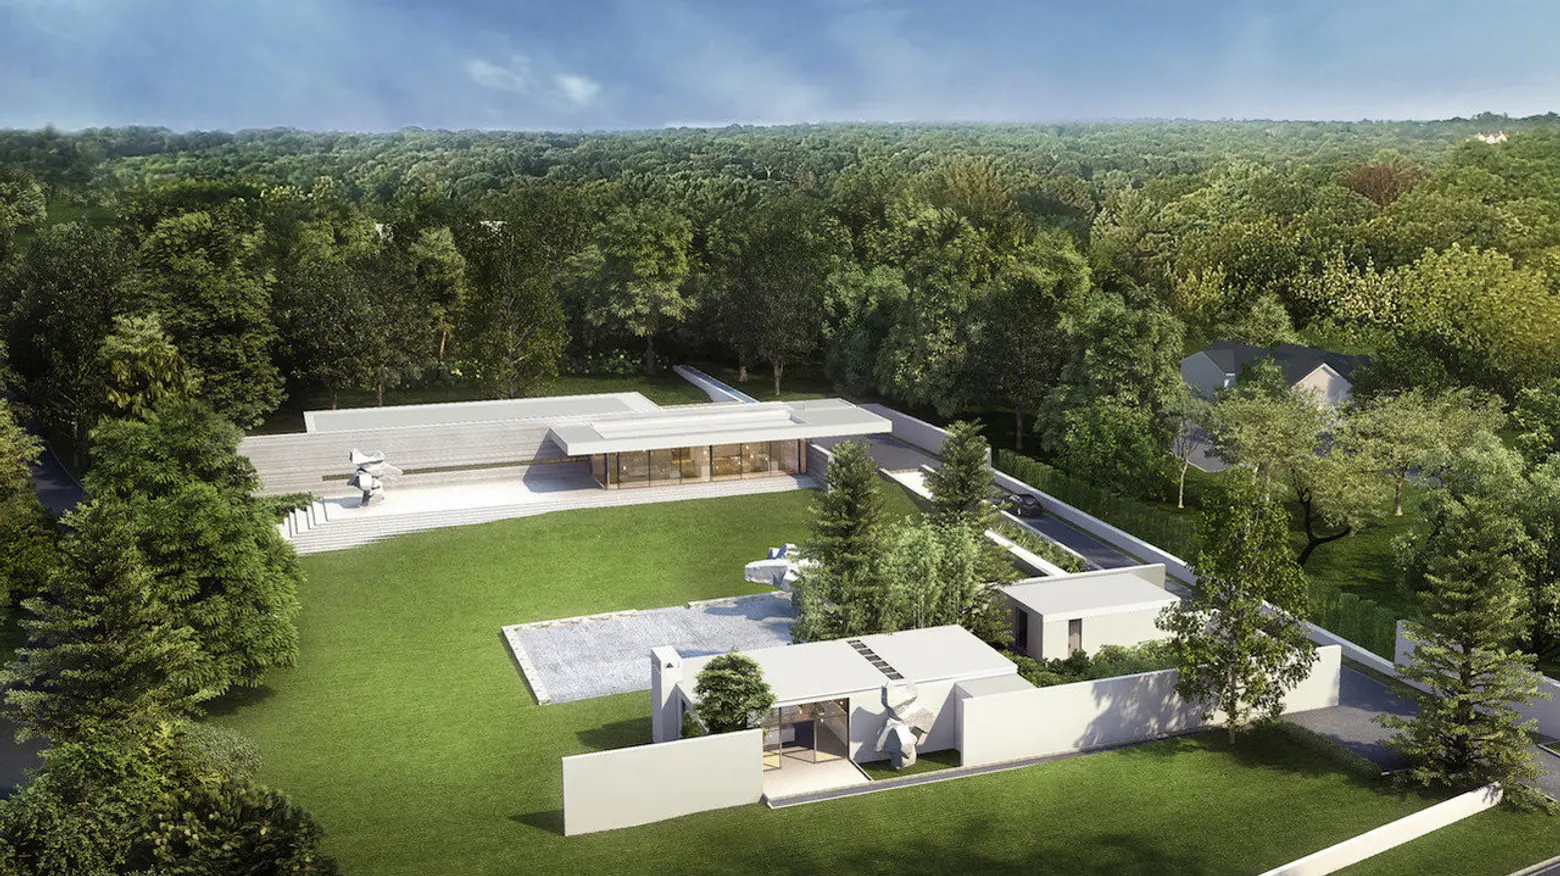 Storied Philip Johnson house in New Canaan, CT asks $7.7M, including plans for a modern mansion